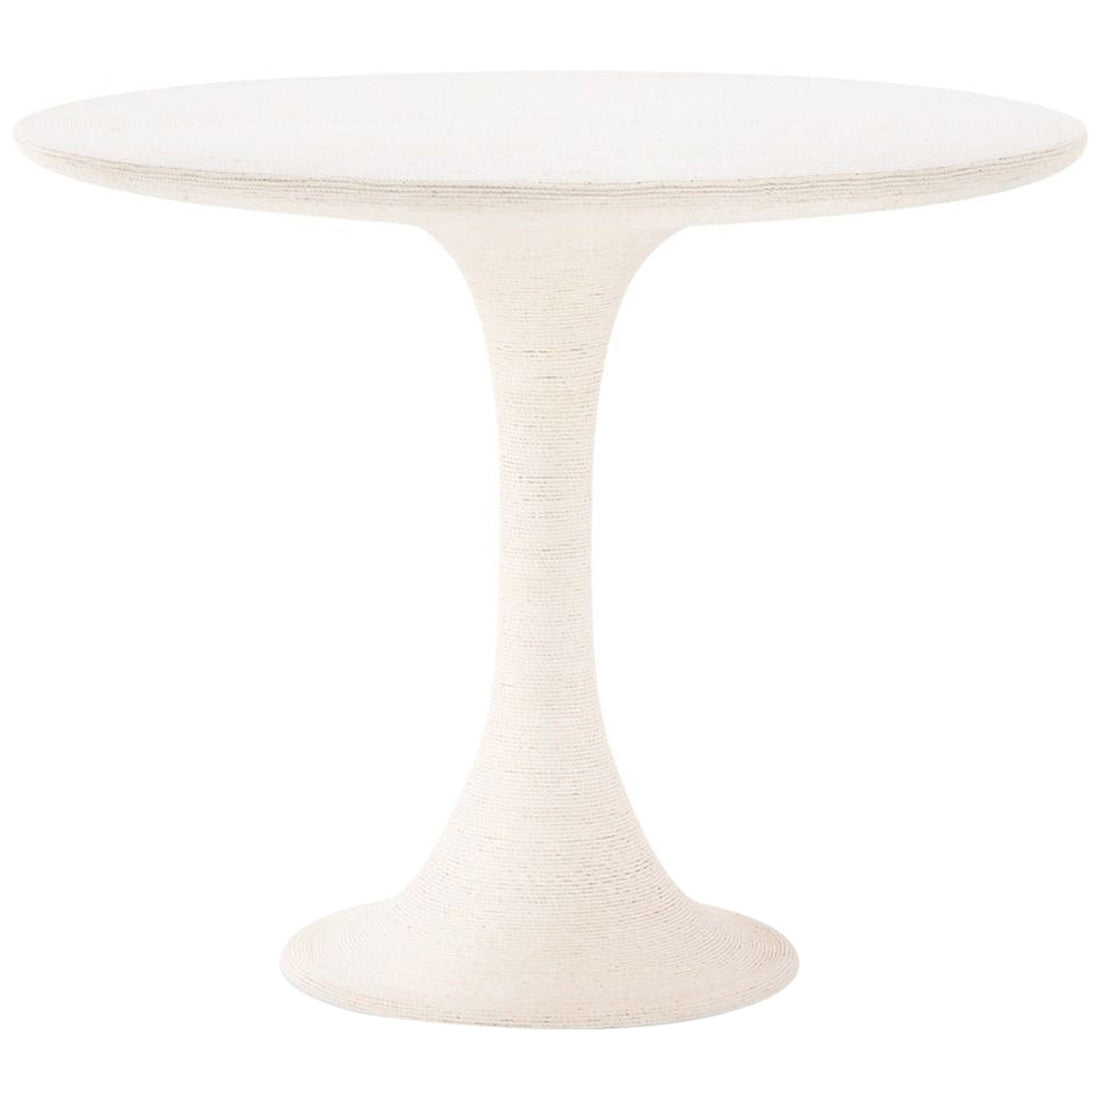 Villa & House Rope Center/Dining Table, White